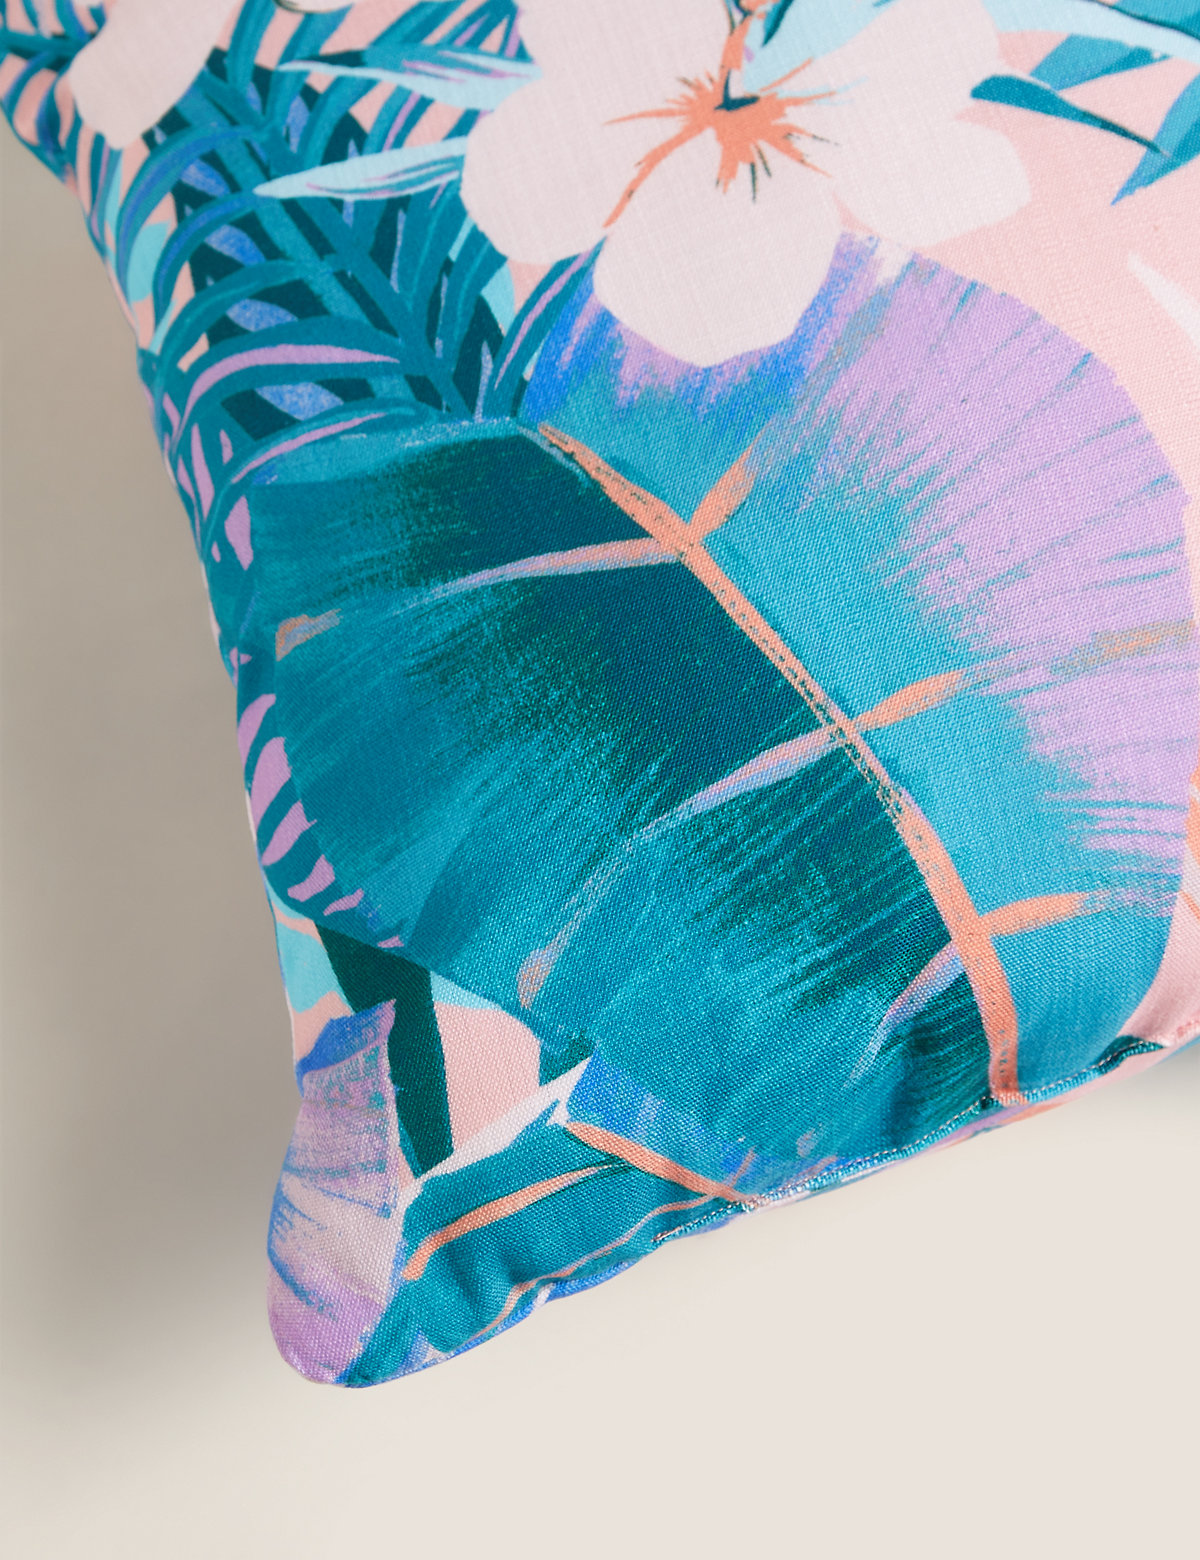 Set of 2 Tropical Outdoor Cushions